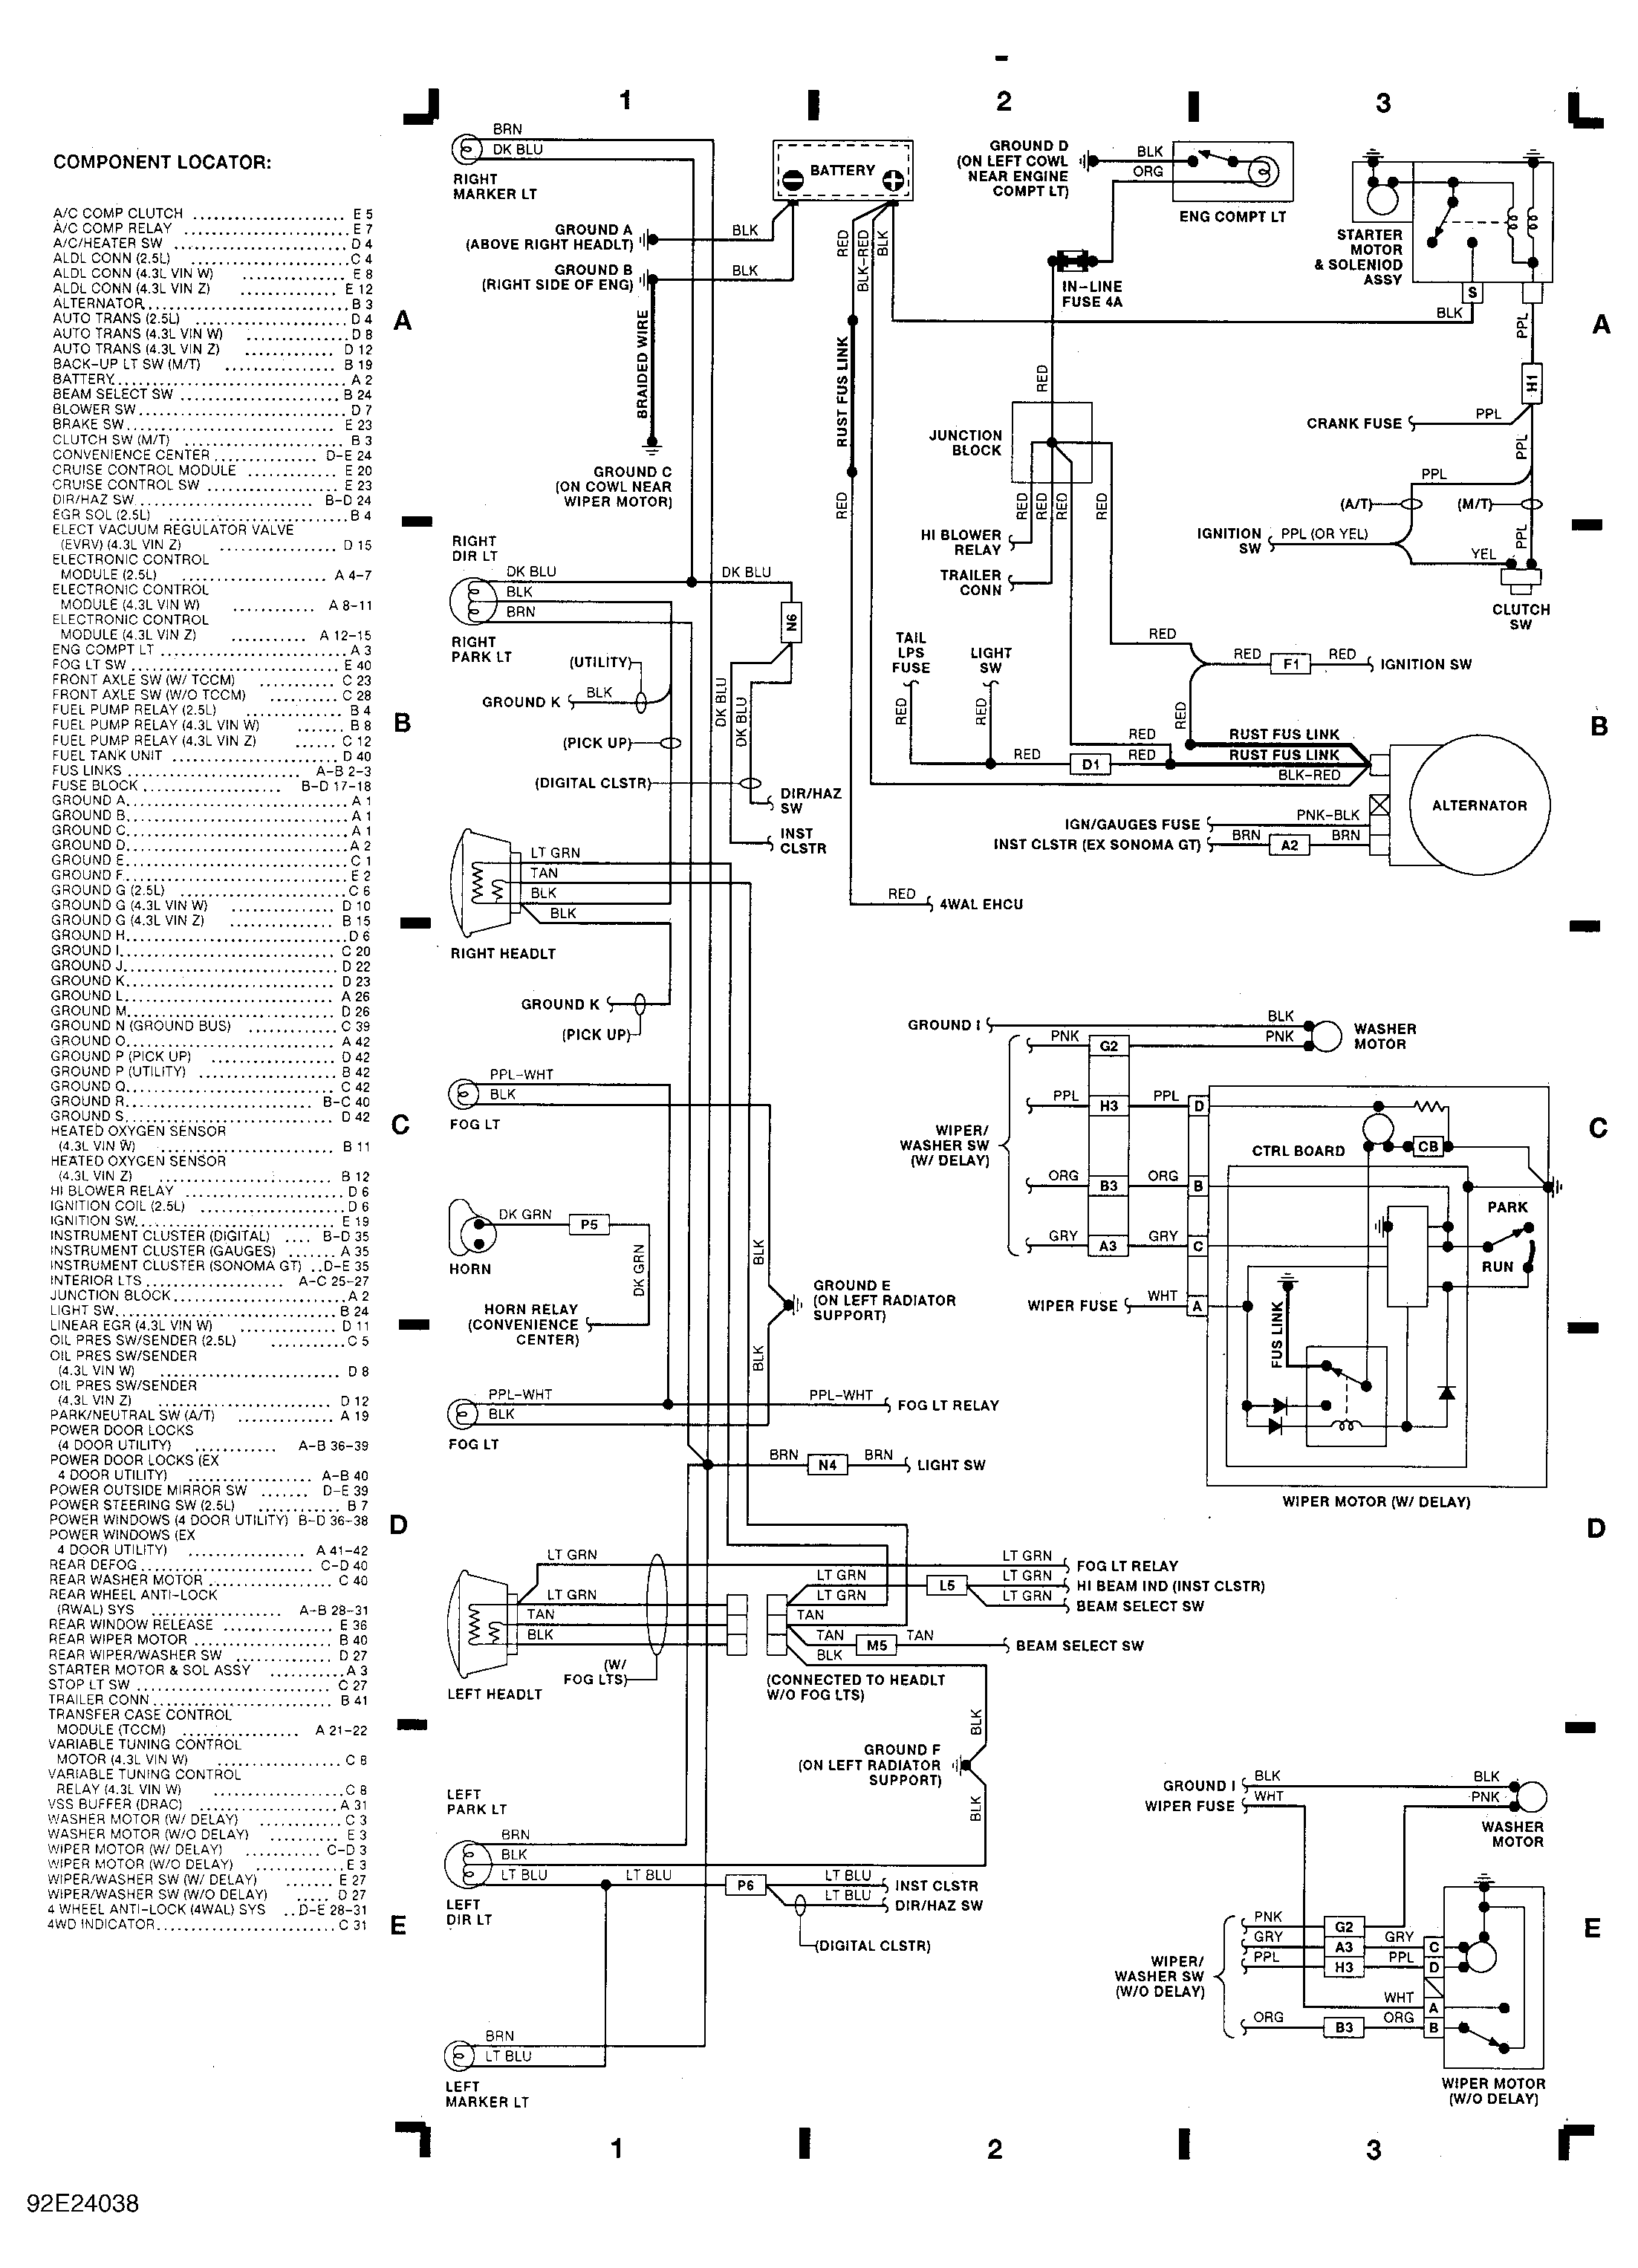 Starter Wiring Diagrams I Have A Chevy Blazer 1999 That Will Not